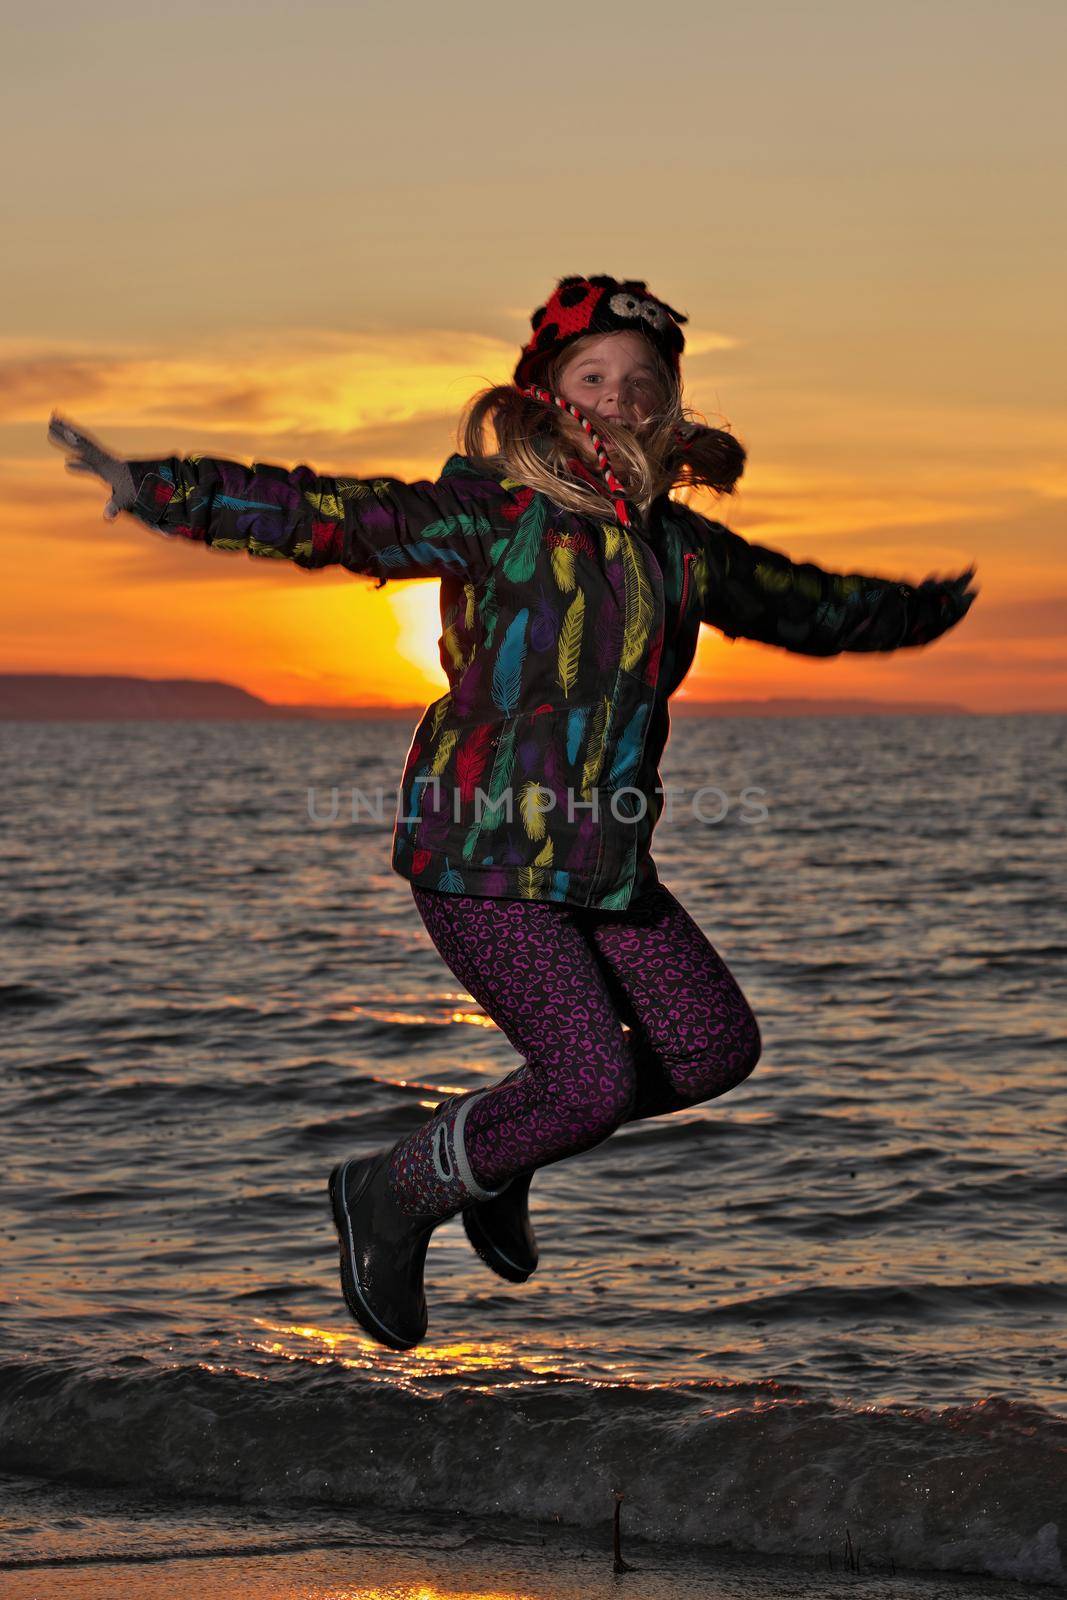 A young girl jumps for joy in front of the setting sun at the beach by markvandam